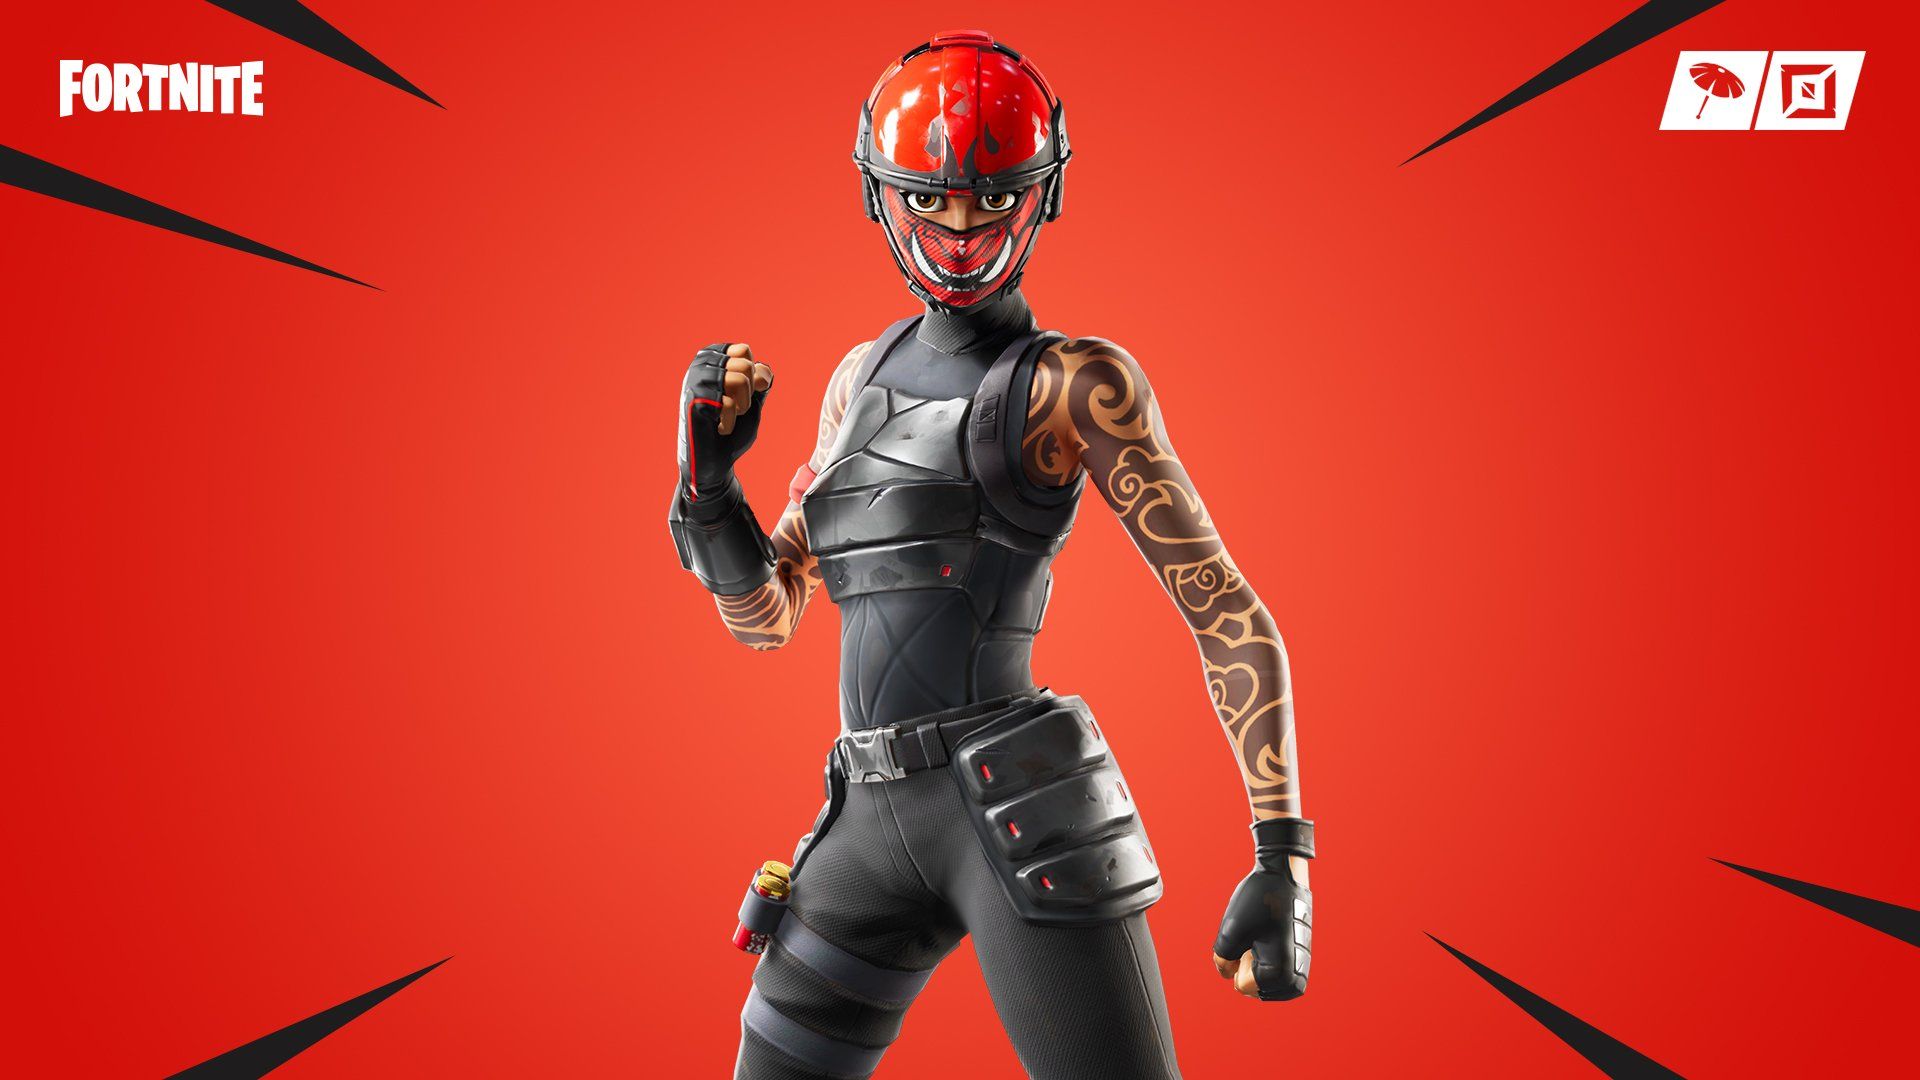 Fortnite your game face on. Get the new Manic